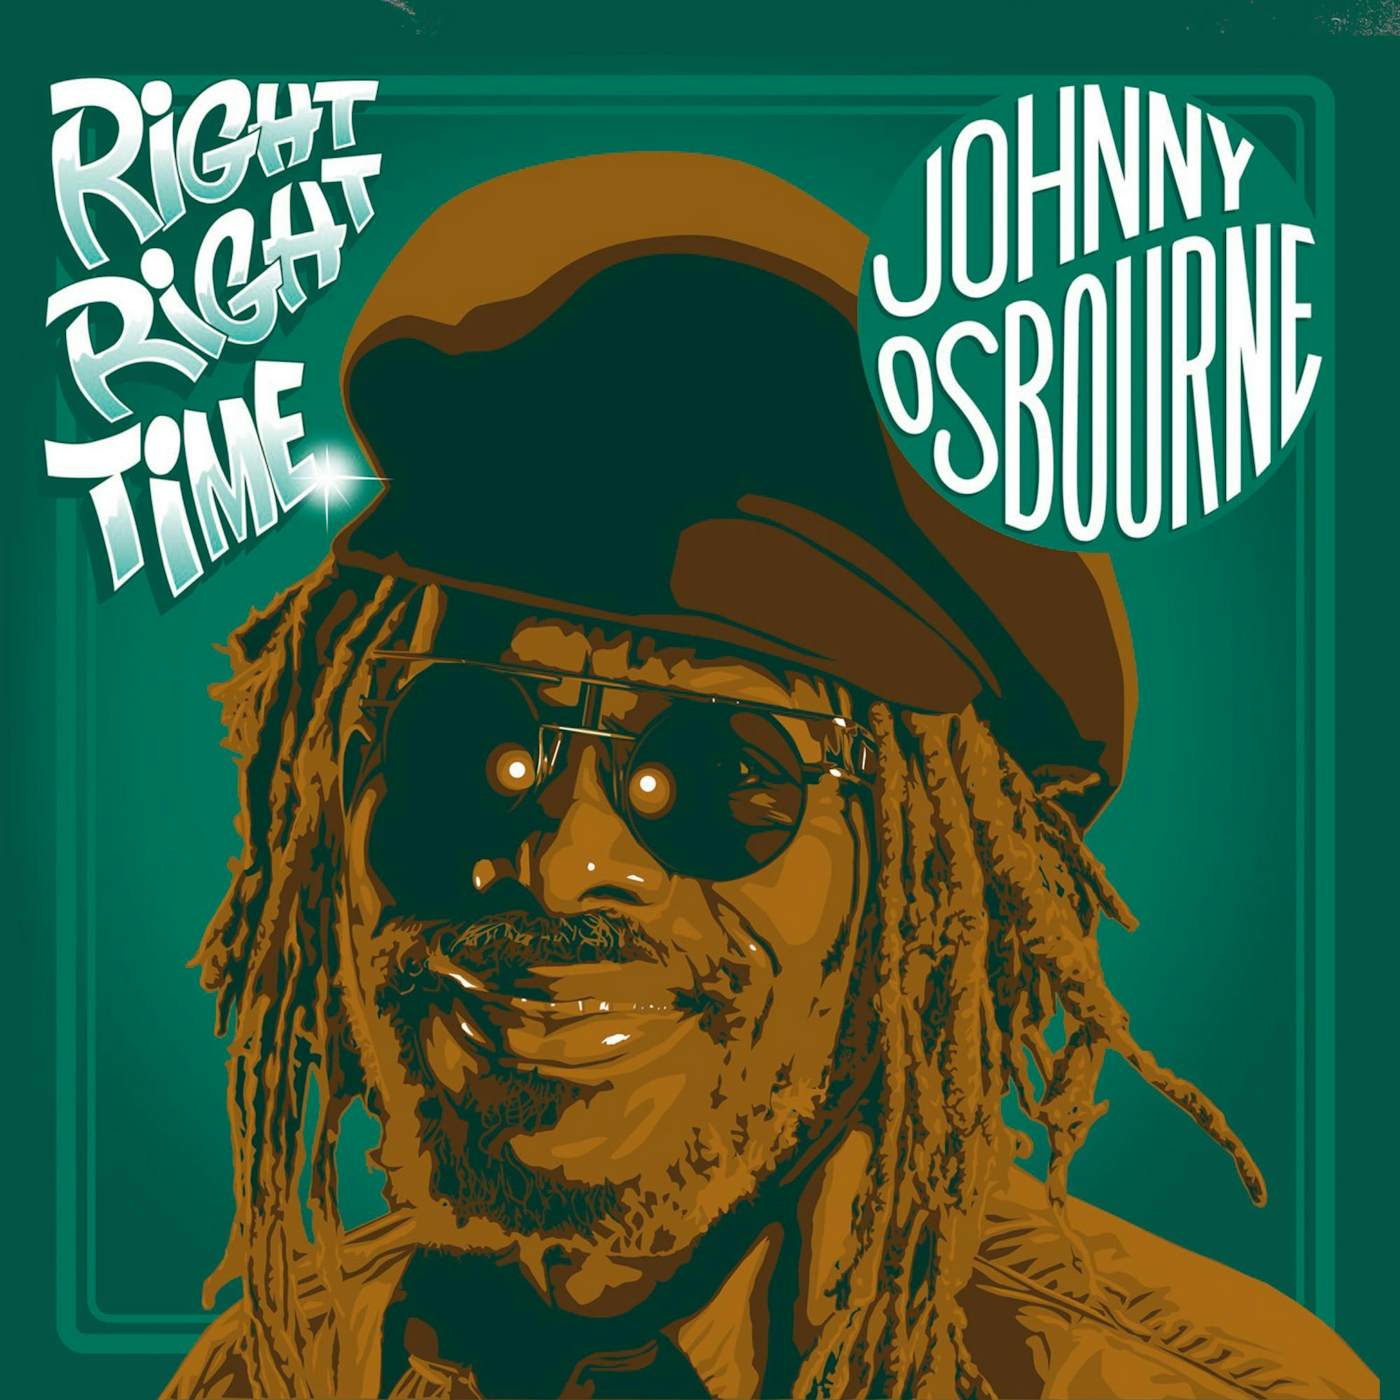 Johnny Osbourne Right Right Time CD